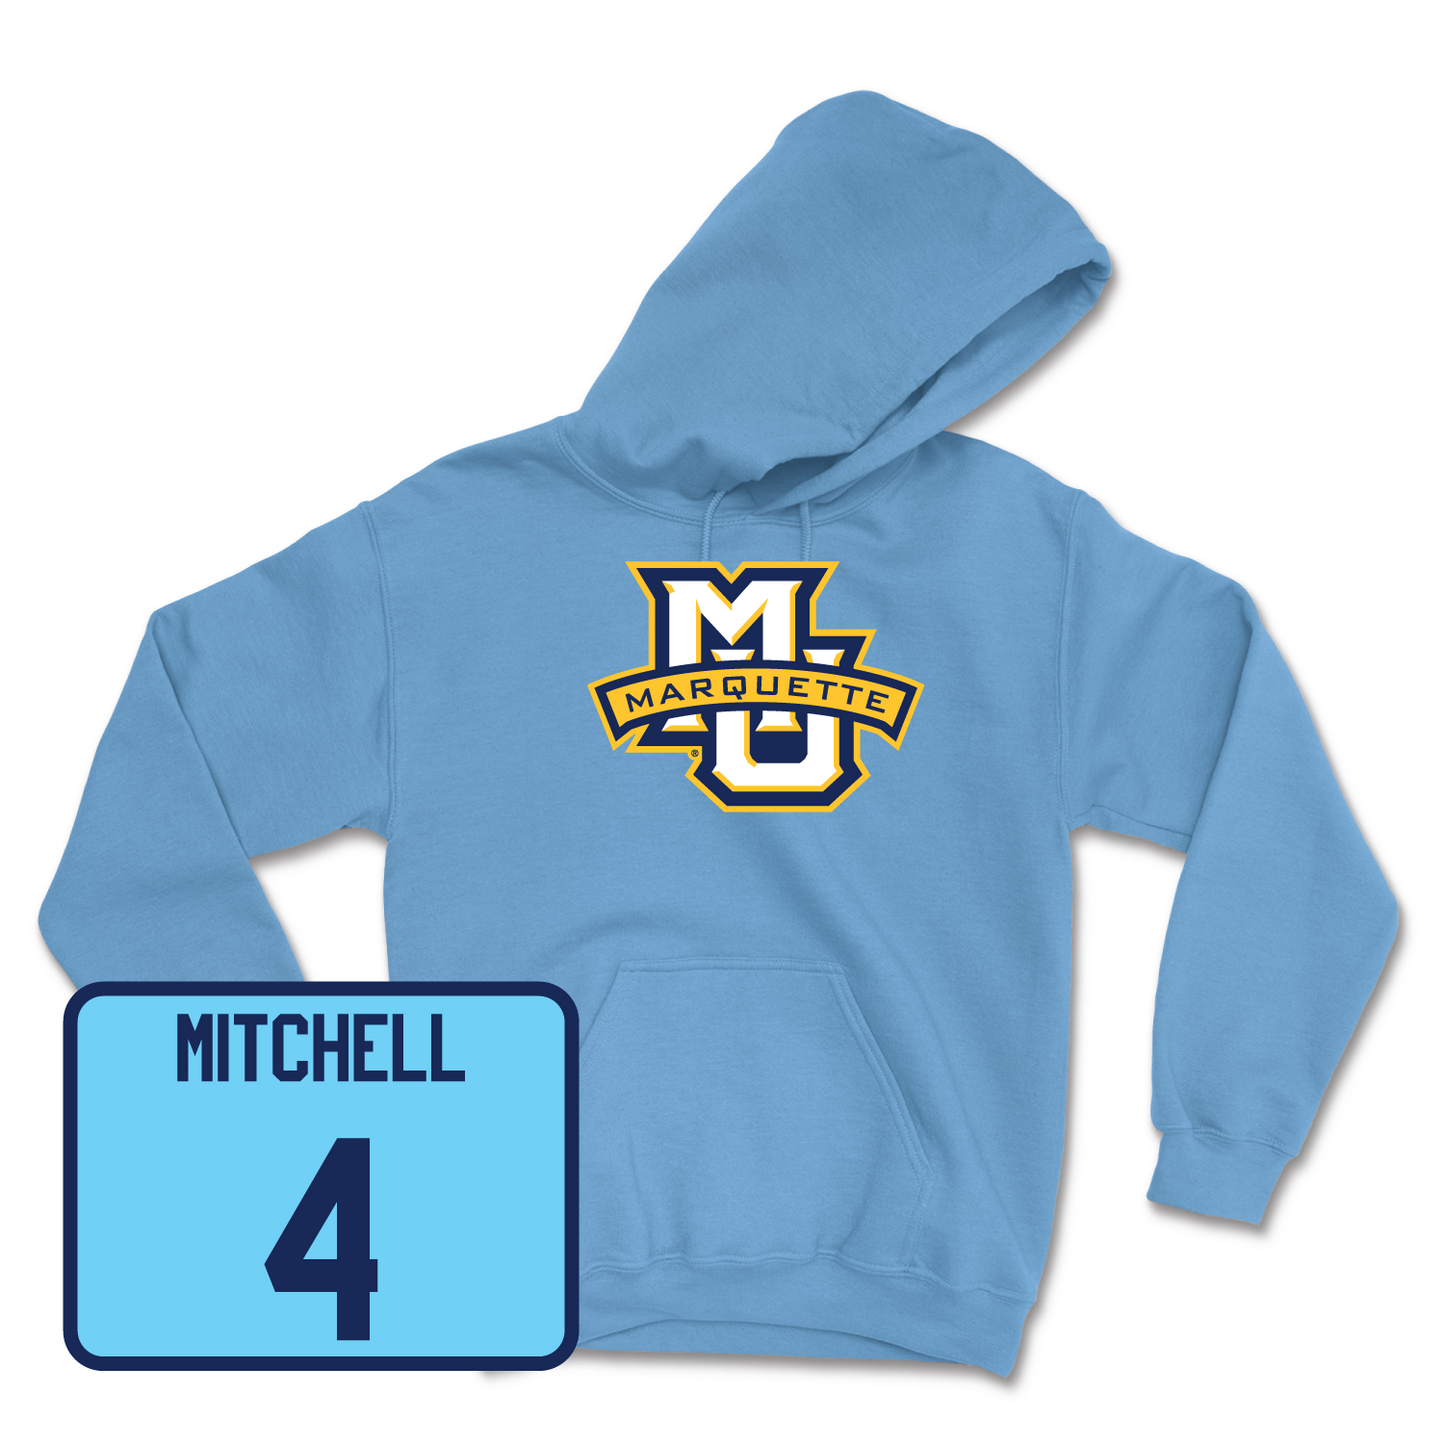 Championship Blue Men's Basketball Marquette Hoodie 2 Small / Stevie Mitchell | #4